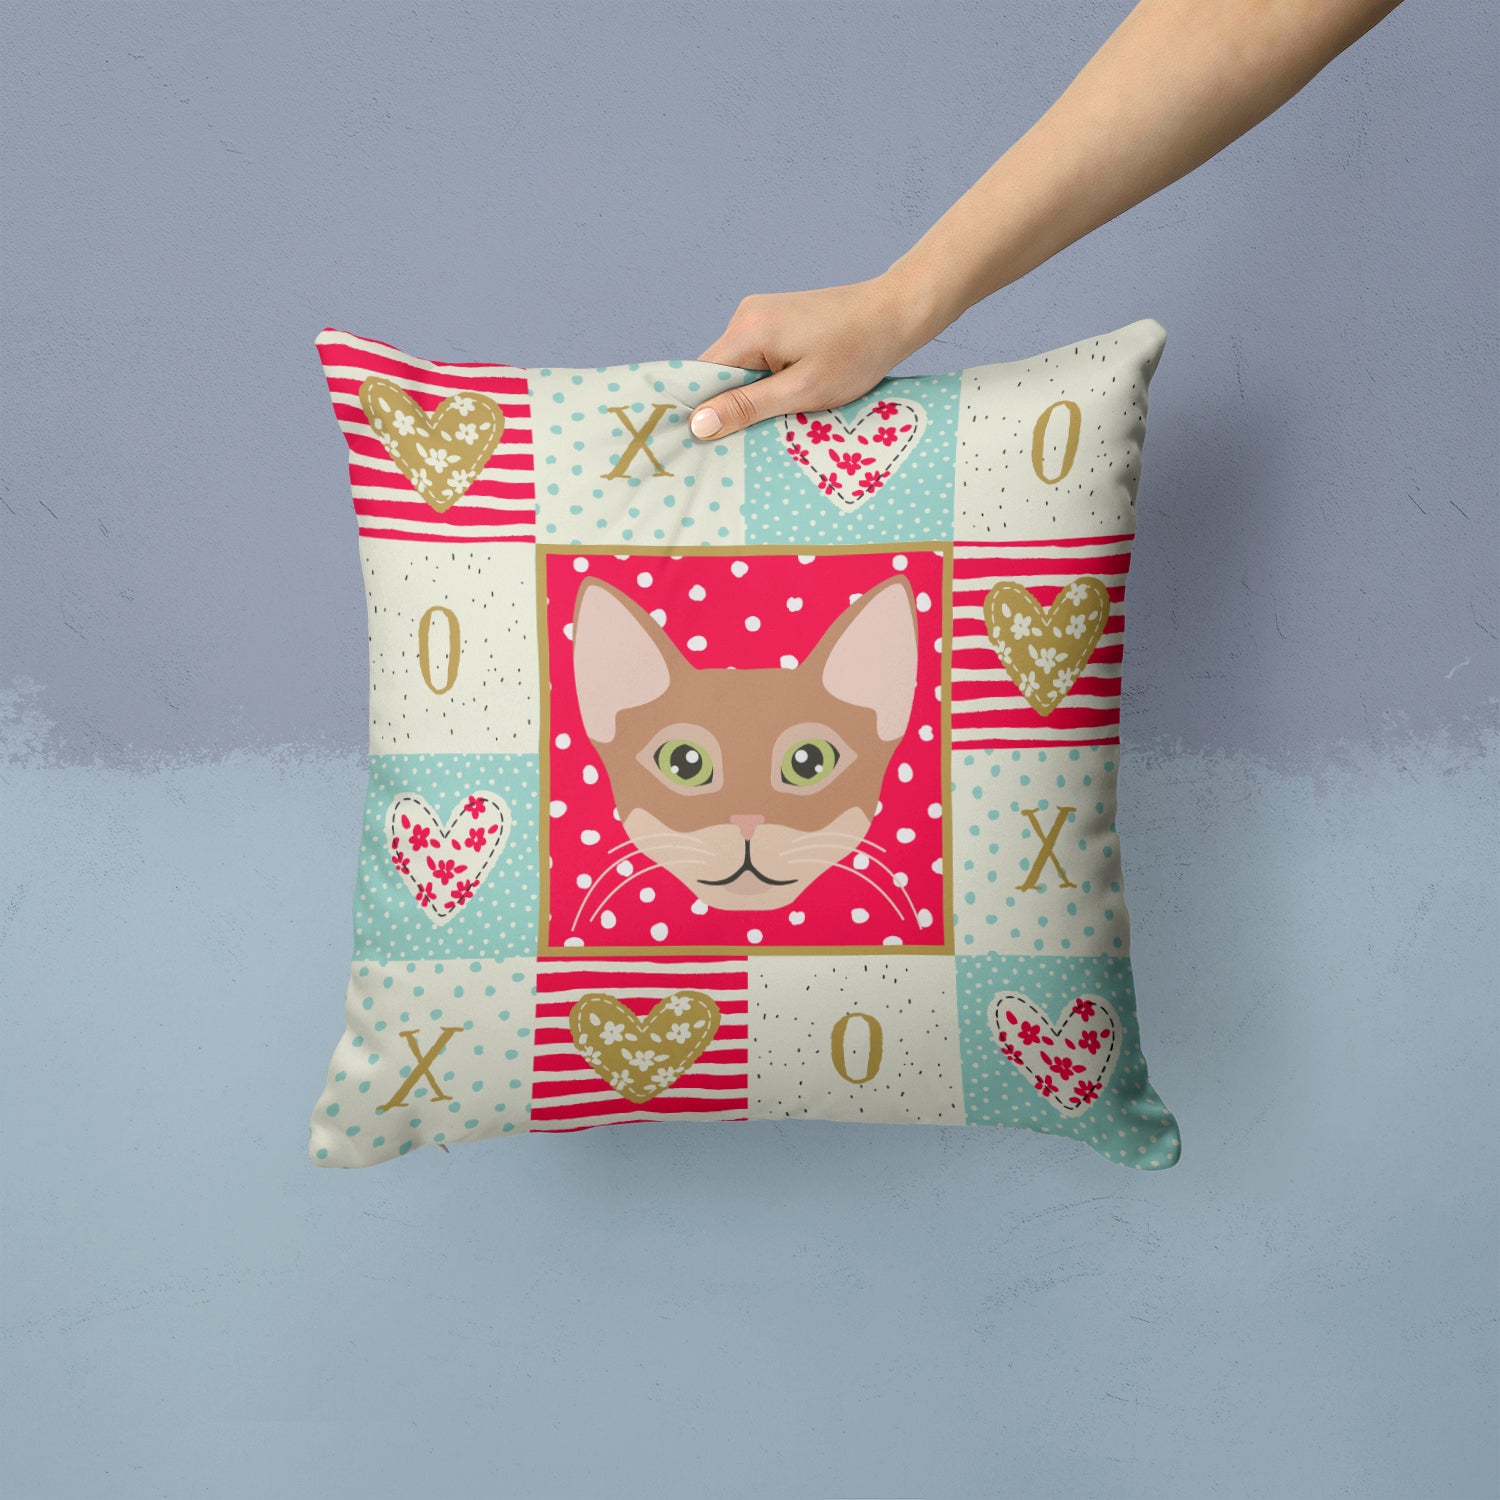 Chausie Cat Love Fabric Decorative Pillow CK5101PW1414 - the-store.com